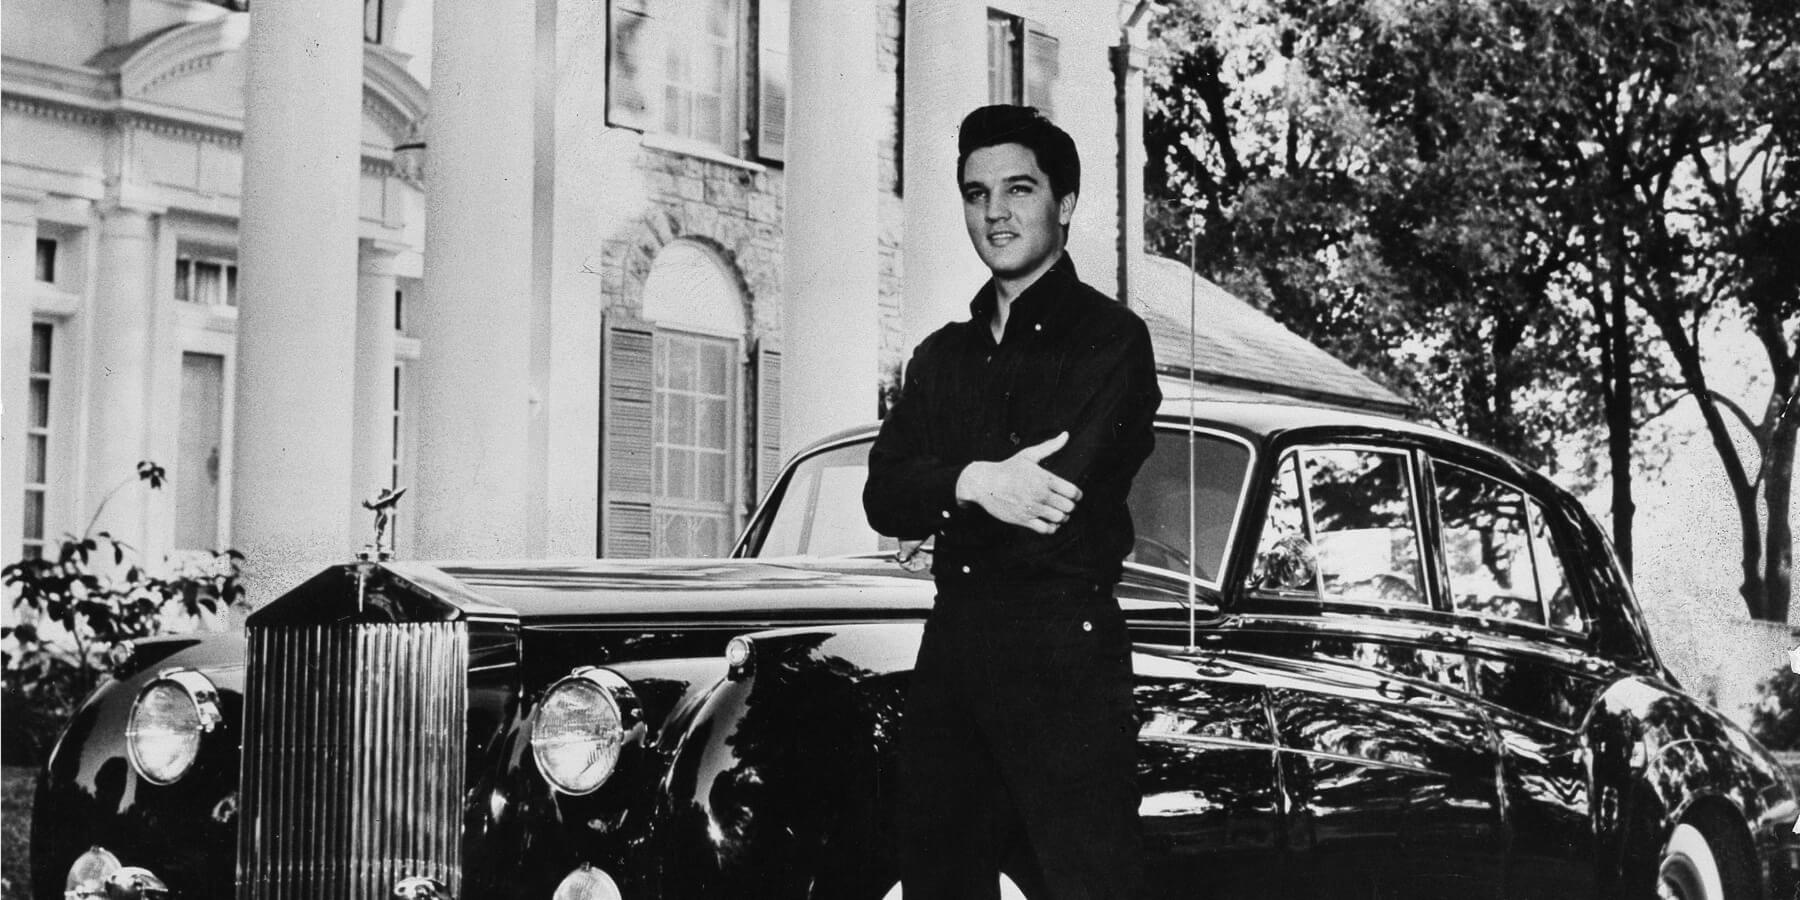 Elvis Presley poses in front of his Memphis, Tennessee home, Graceland